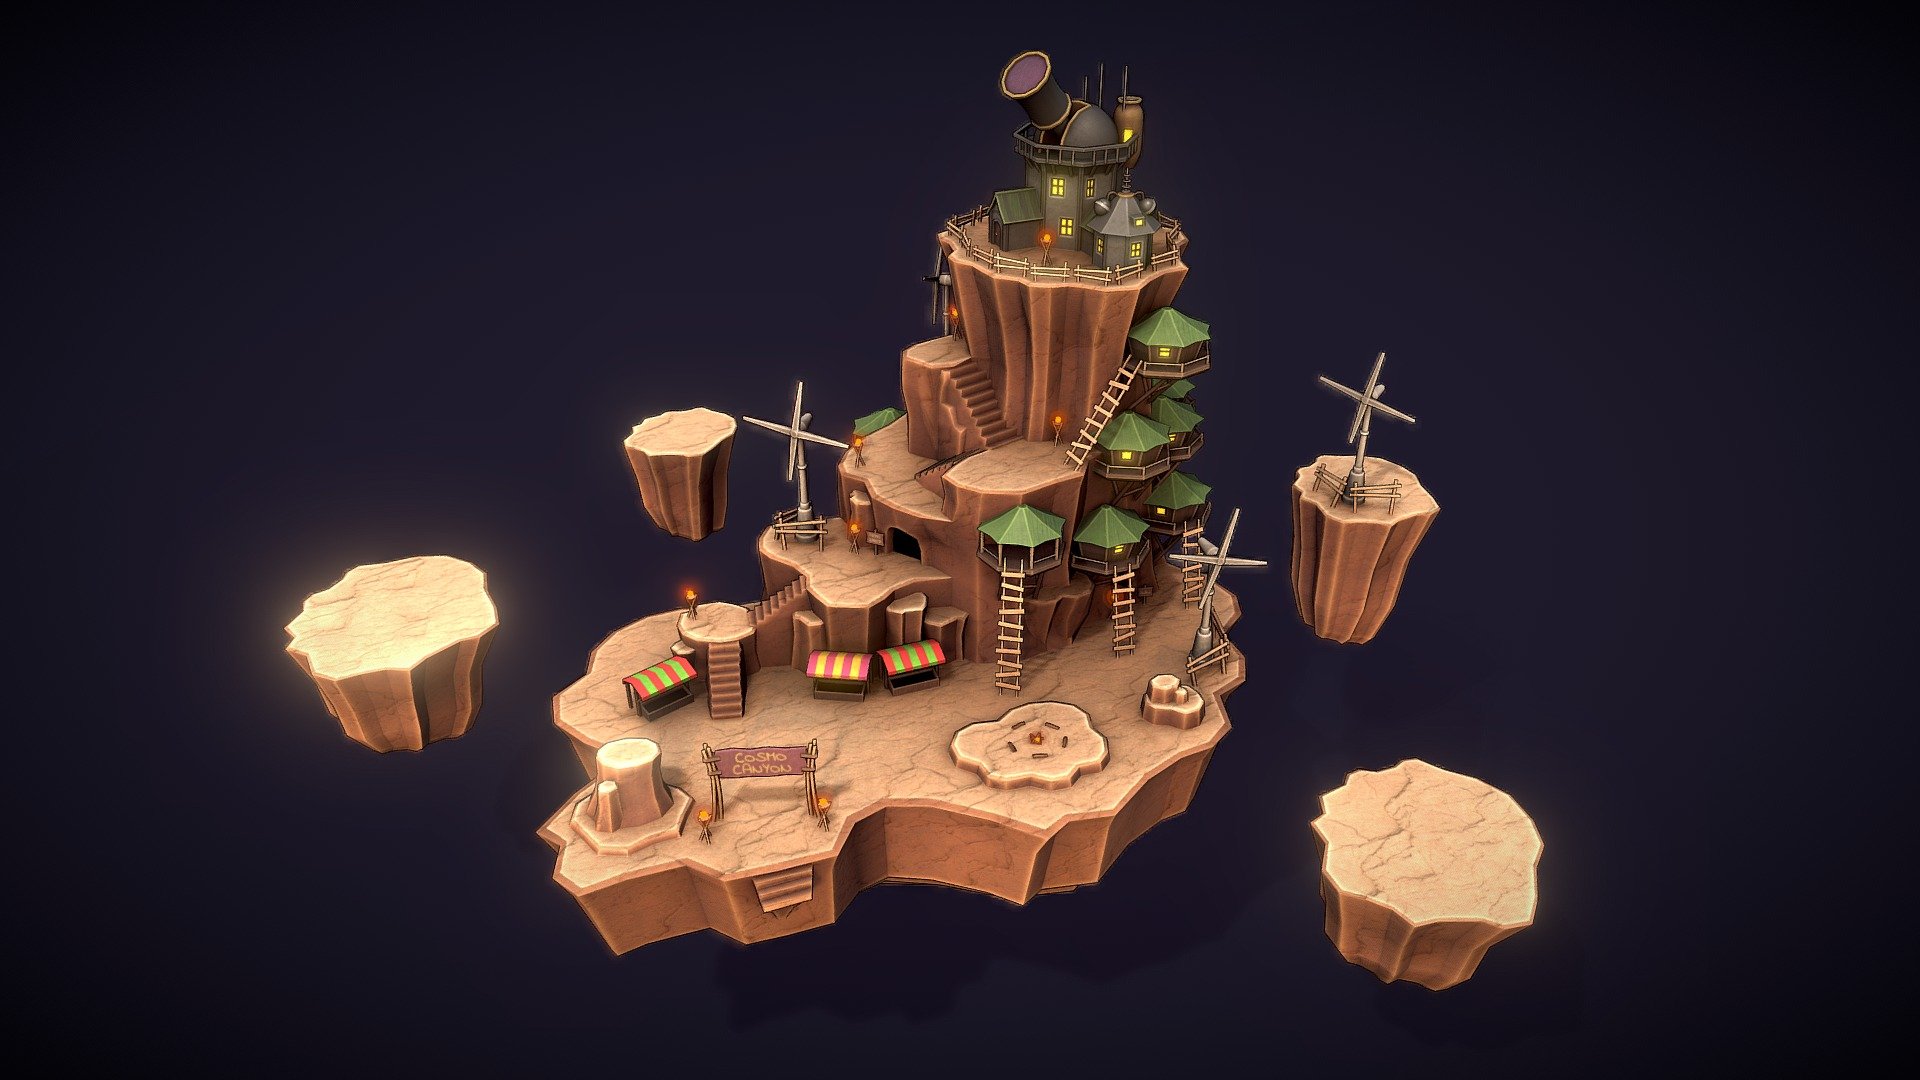 Fan-art from the game Final Fantasy 7!! This is the Cosmo Canyon, one of the cities that can be visited through the game. It was a comission where I was asked to made an stylized and simplified version of the place, and this is how it turned out!

I decided to push the limit of Sketchfab's capabilities, and added a day-night cycle to the scene. It was a bit tricky, as lamps can't be animated, at least for now. But I think this works quite nicely. I hope you like it! :D

Made with Blender 2.8, Marmoset Toolbag (baking) and Substance Painter. Music from the original game.

(Play this music in the background to get into the scene's mood! https://www.youtube.com/watch?v=io6H-FrK_d0) - Cosmo Canyon - FFVII (Day-Night Cycle) - 3D model by Ivanix88 3d model